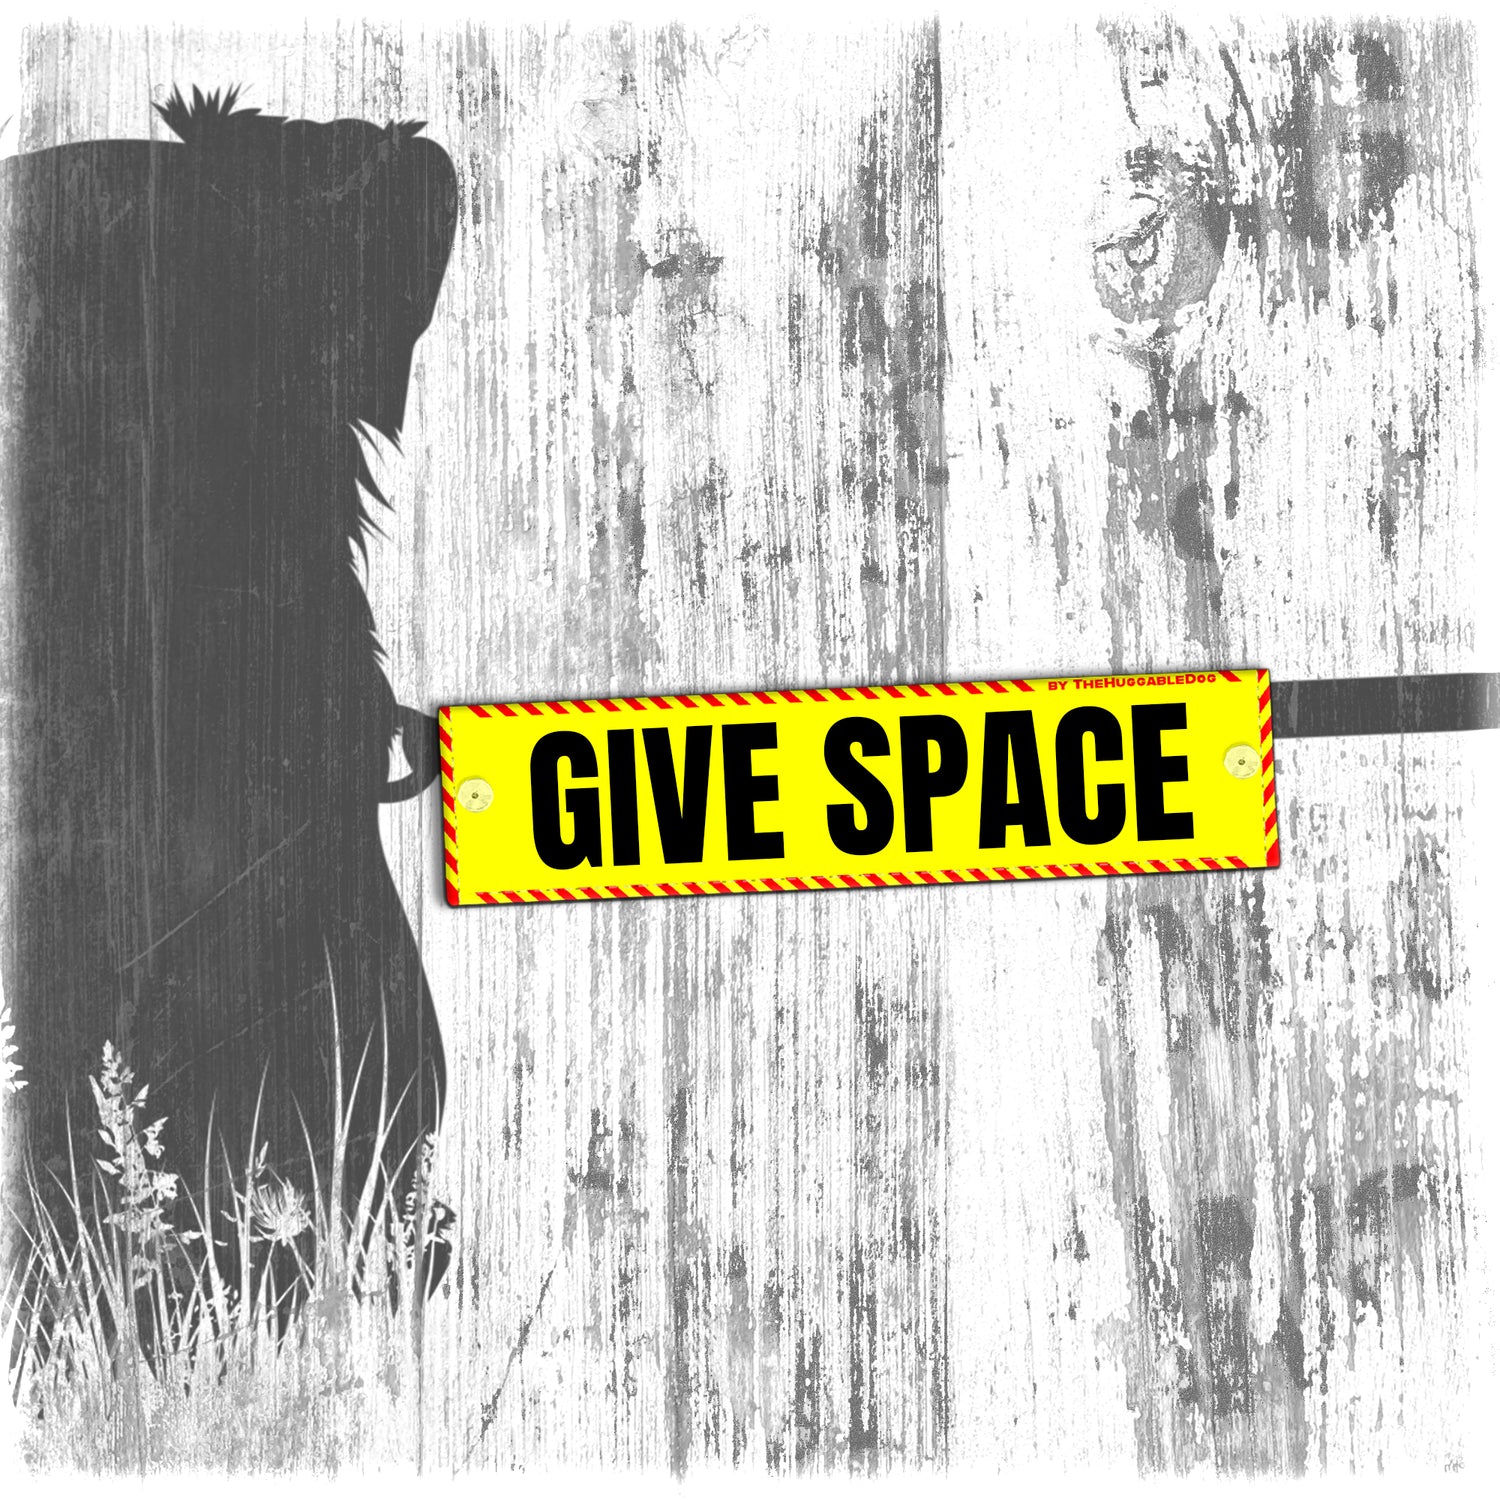 GIVE SPACE